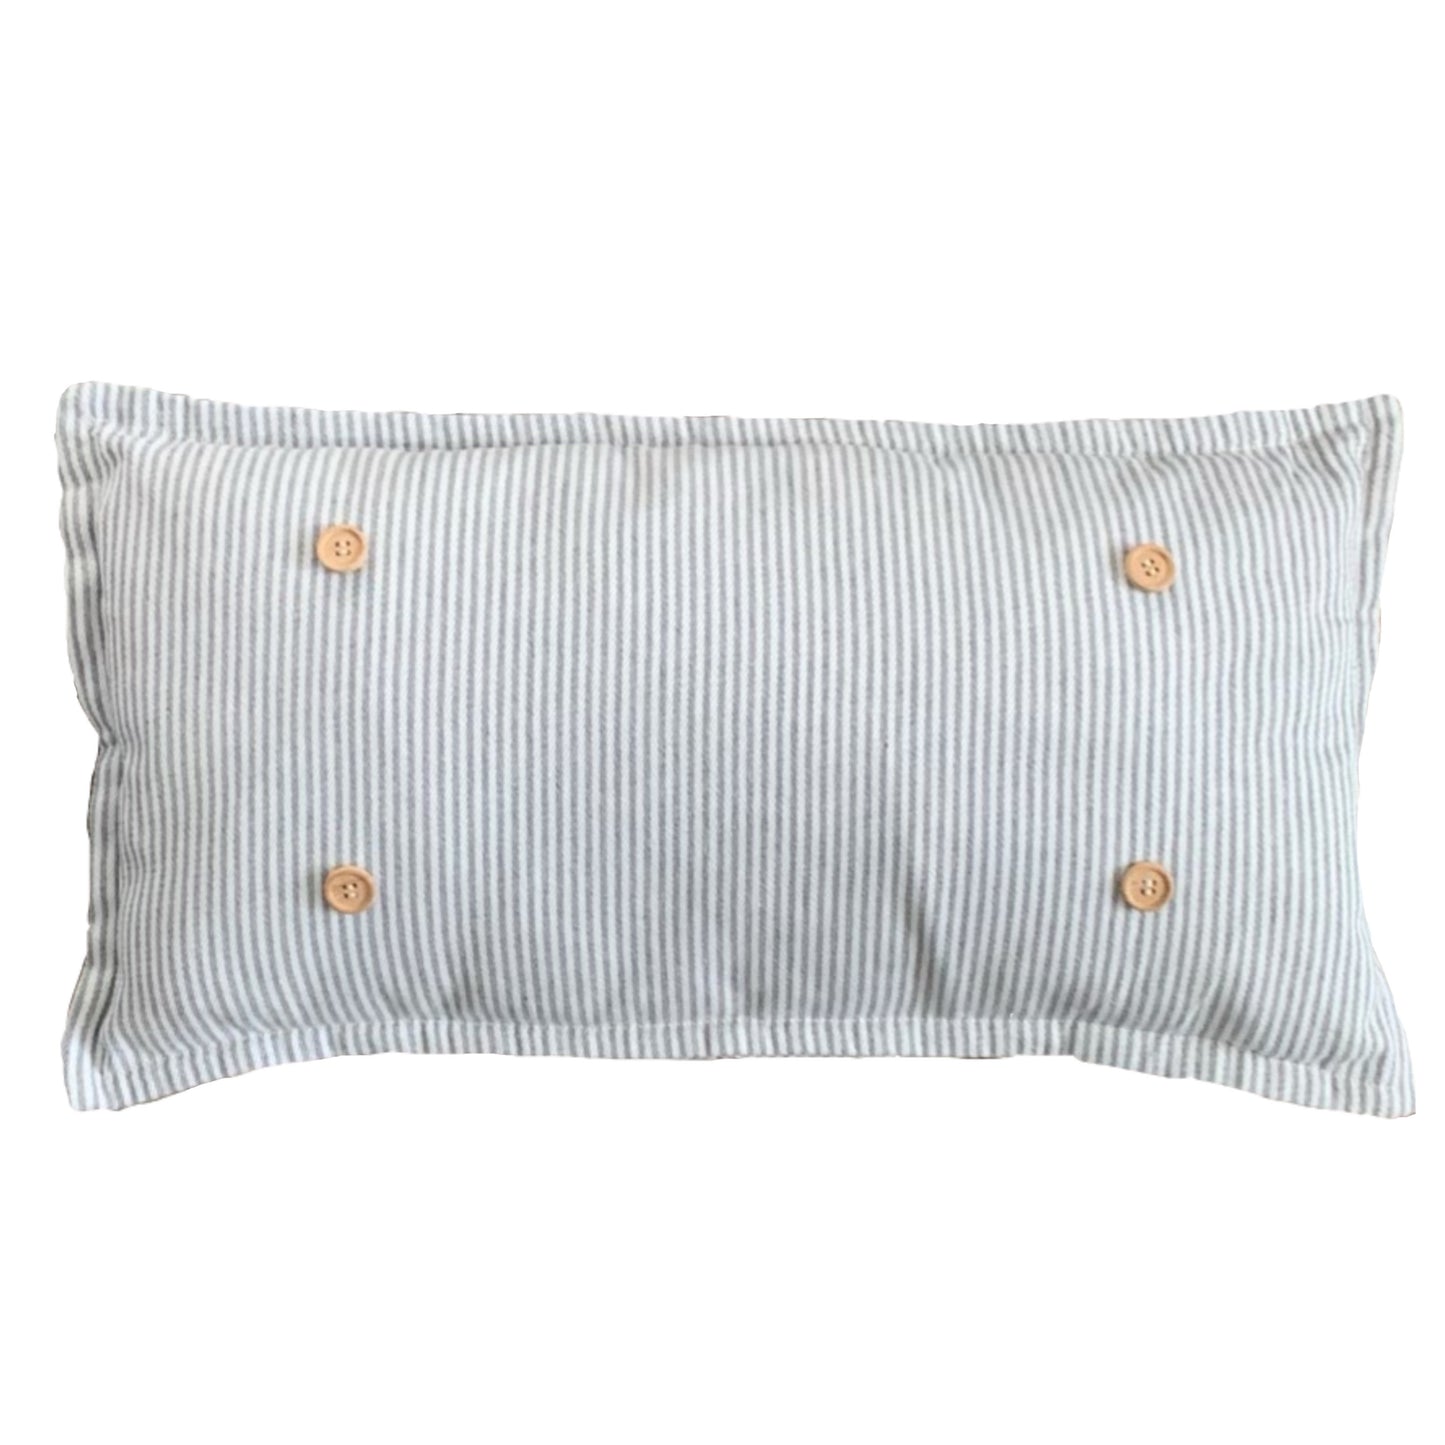 Pillow ONLY (with fluffy insert): Farmhouse Gray/White Ticking Stripes